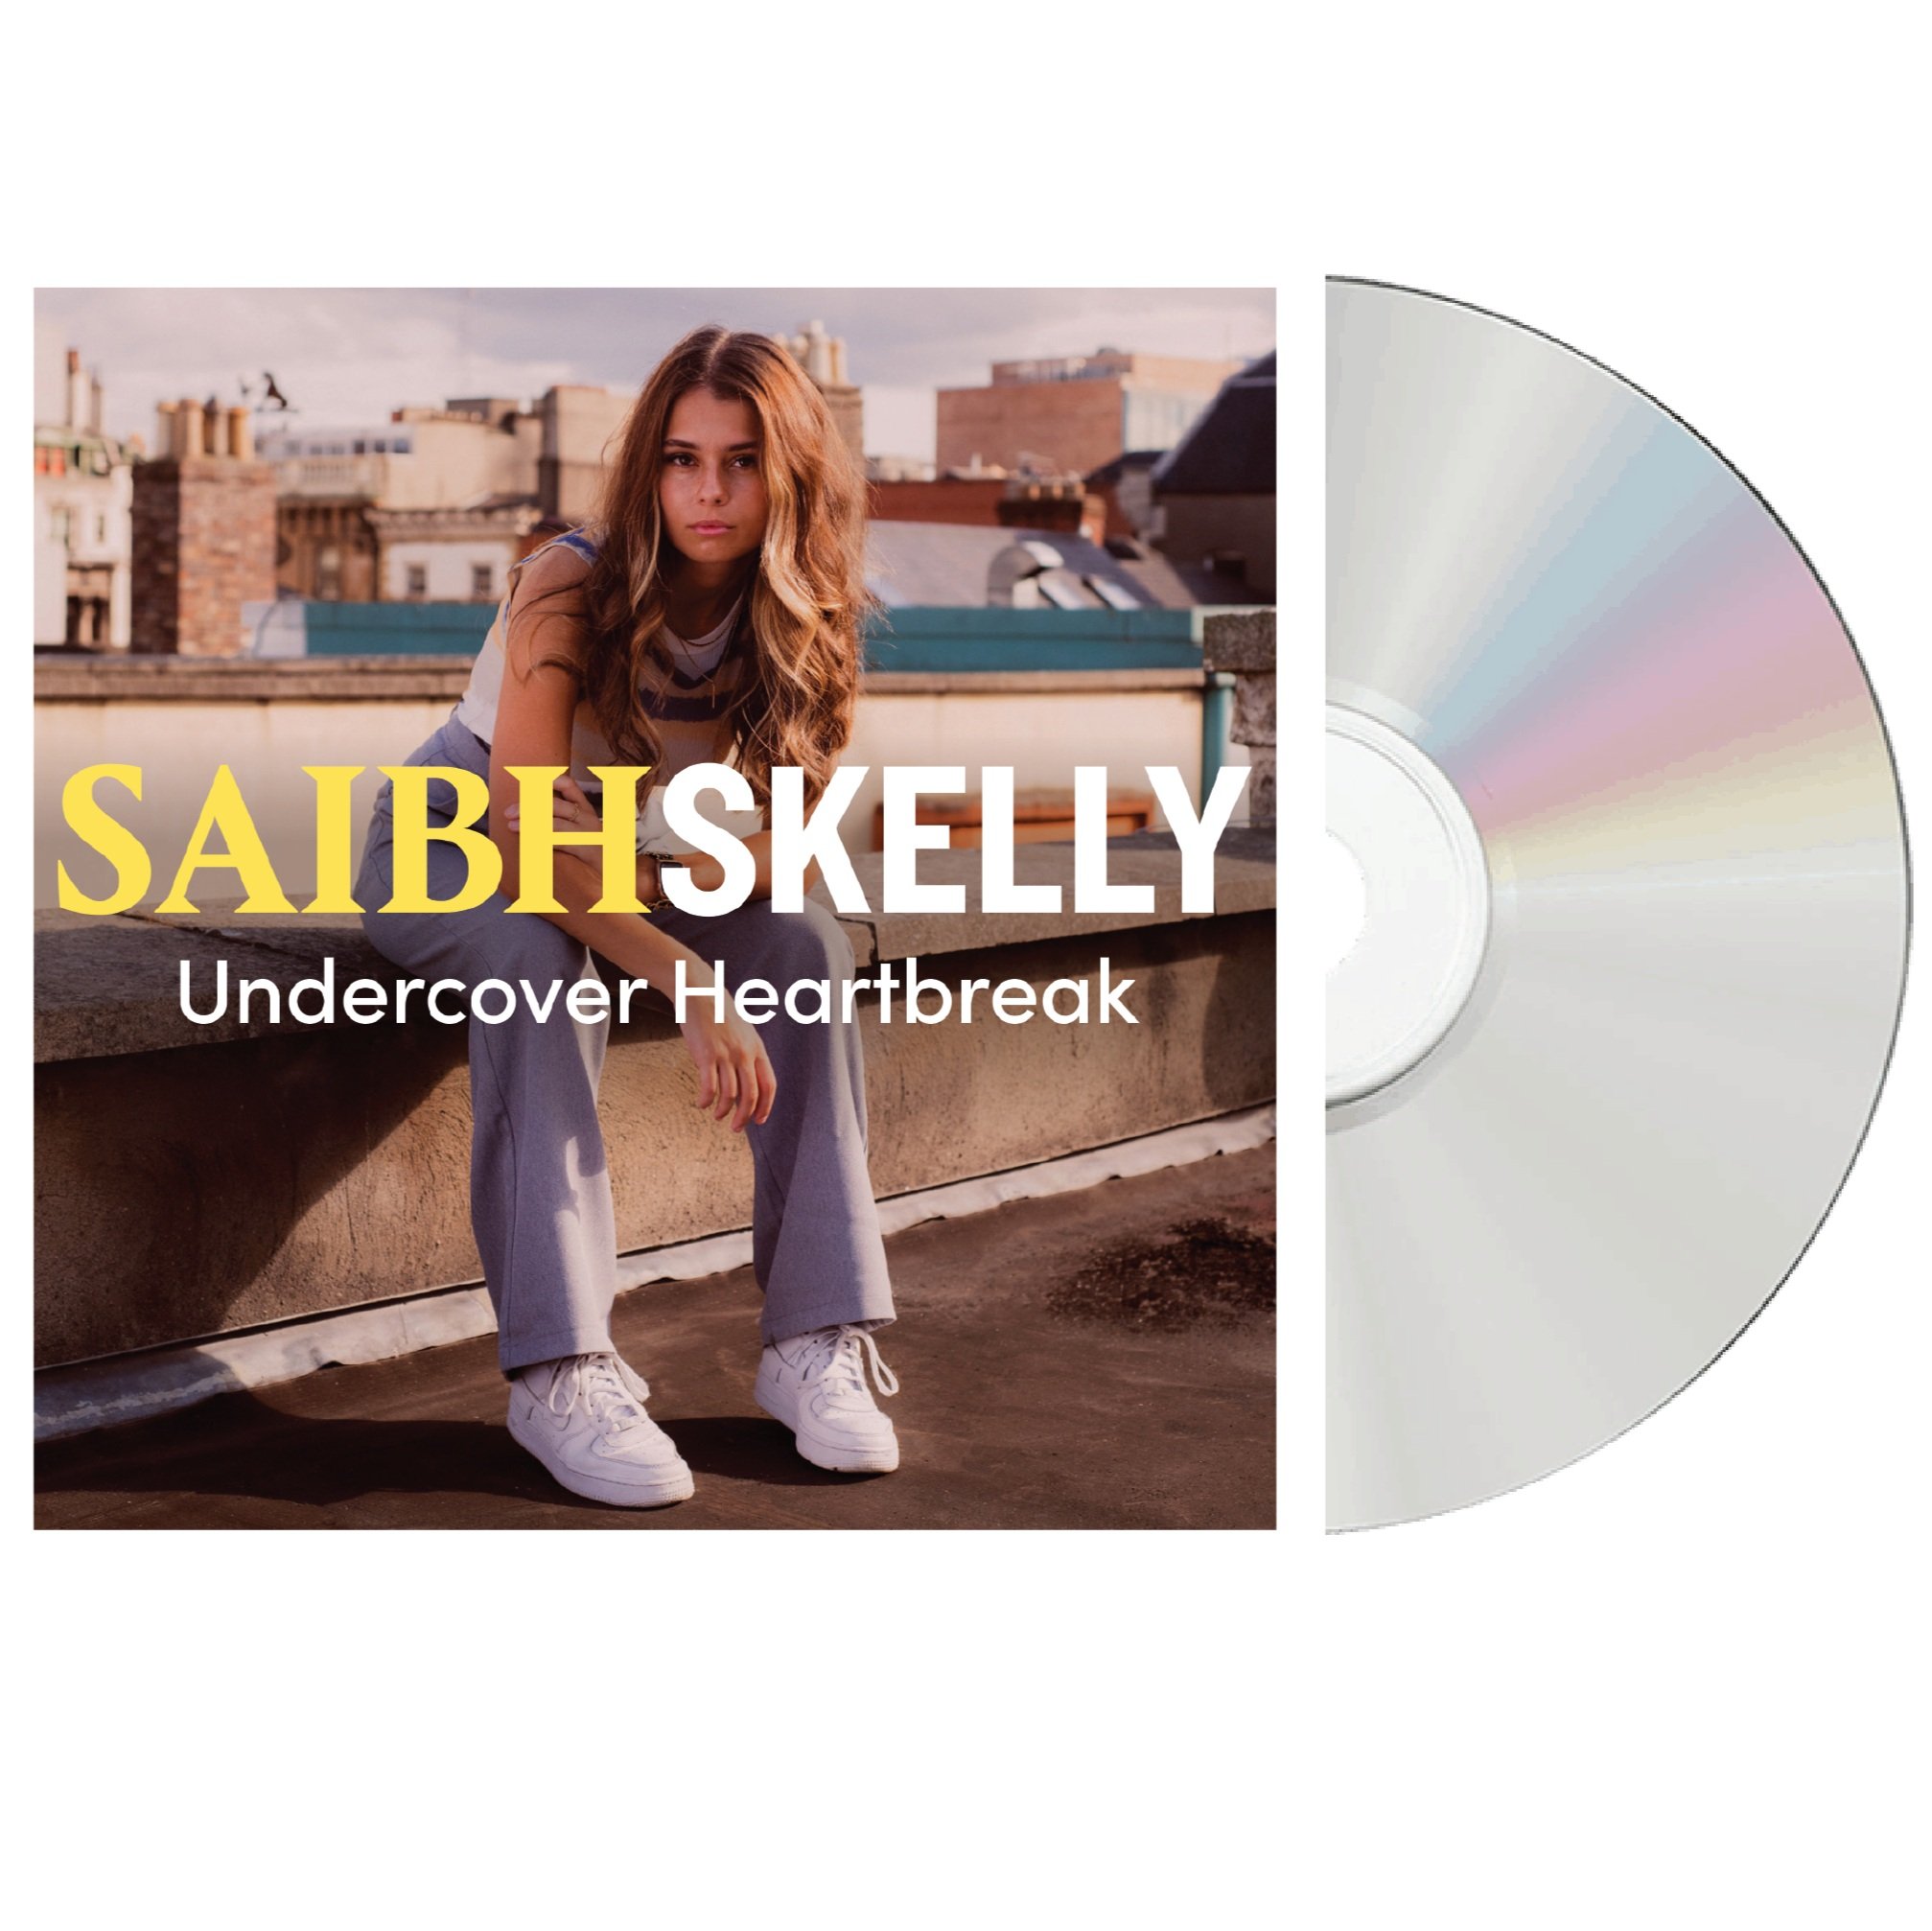 Saibh Skelly "Undercover Heartbreak" EP - Preorder Now